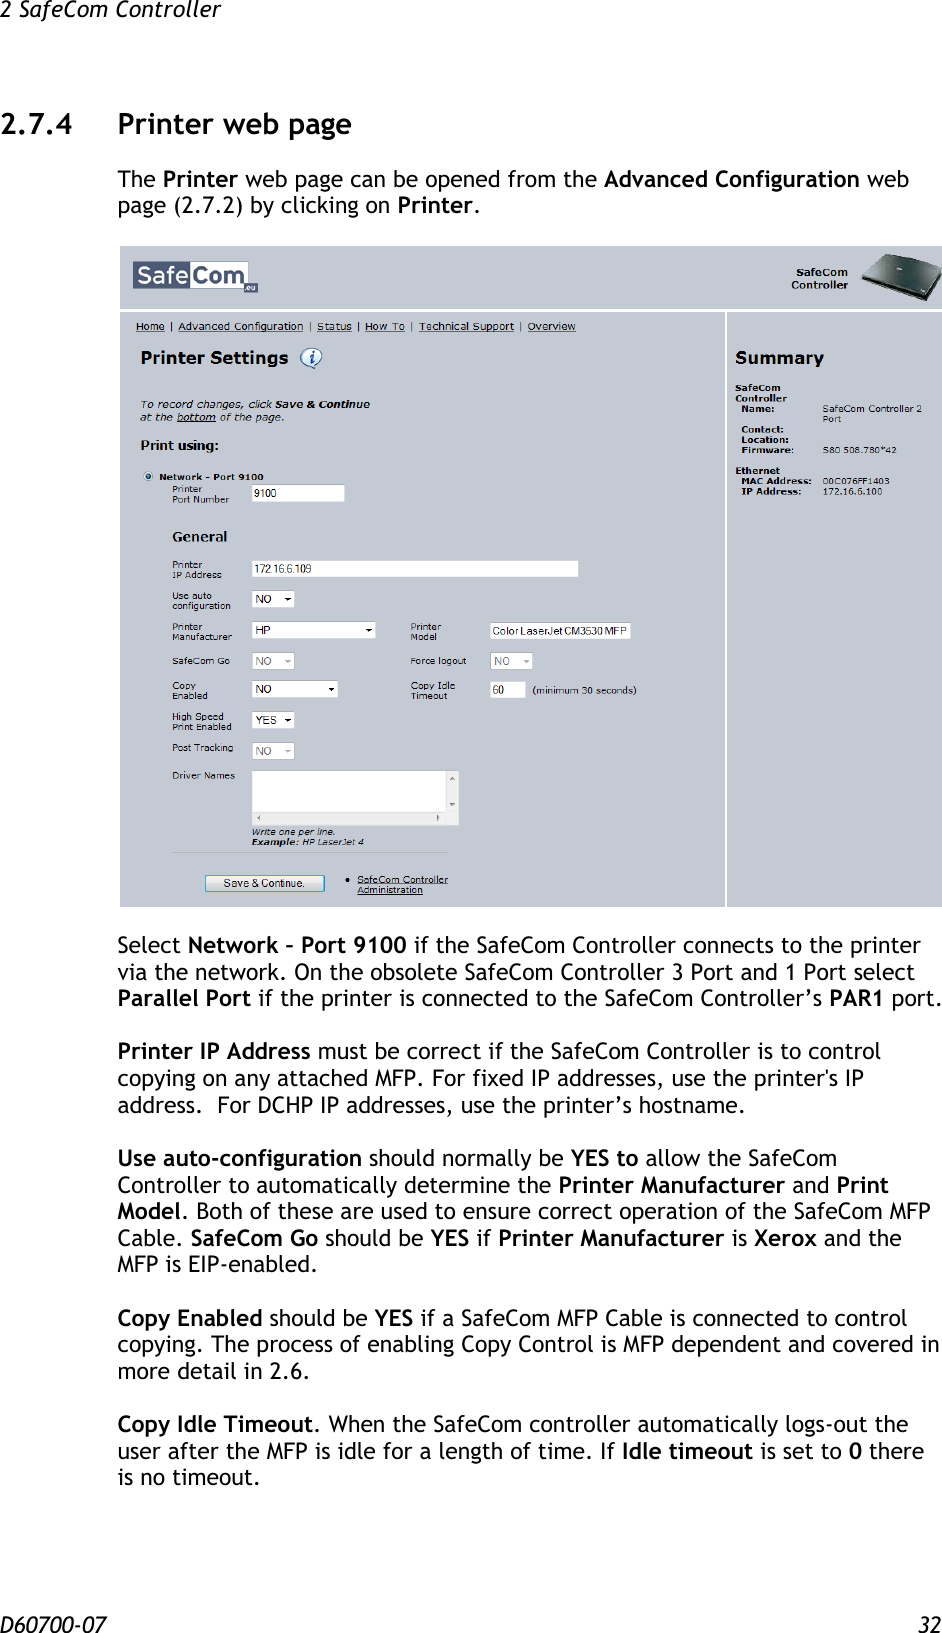 2 SafeCom Controller  D60700-07 32 2.7.4 Printer web page The Printer web page can be opened from the Advanced Configuration web page (2.7.2) by clicking on Printer.    Select Network – Port 9100 if the SafeCom Controller connects to the printer via the network. On the obsolete SafeCom Controller 3 Port and 1 Port select Parallel Port if the printer is connected to the SafeCom Controller’s PAR1 port.  Printer IP Address must be correct if the SafeCom Controller is to control copying on any attached MFP. For fixed IP addresses, use the printer&apos;s IP address.  For DCHP IP addresses, use the printer’s hostname.  Use auto-configuration should normally be YES to allow the SafeCom Controller to automatically determine the Printer Manufacturer and Print Model. Both of these are used to ensure correct operation of the SafeCom MFP Cable. SafeCom Go should be YES if Printer Manufacturer is Xerox and the MFP is EIP-enabled.  Copy Enabled should be YES if a SafeCom MFP Cable is connected to control copying. The process of enabling Copy Control is MFP dependent and covered in more detail in 2.6.  Copy Idle Timeout. When the SafeCom controller automatically logs-out the user after the MFP is idle for a length of time. If Idle timeout is set to 0 there is no timeout. 